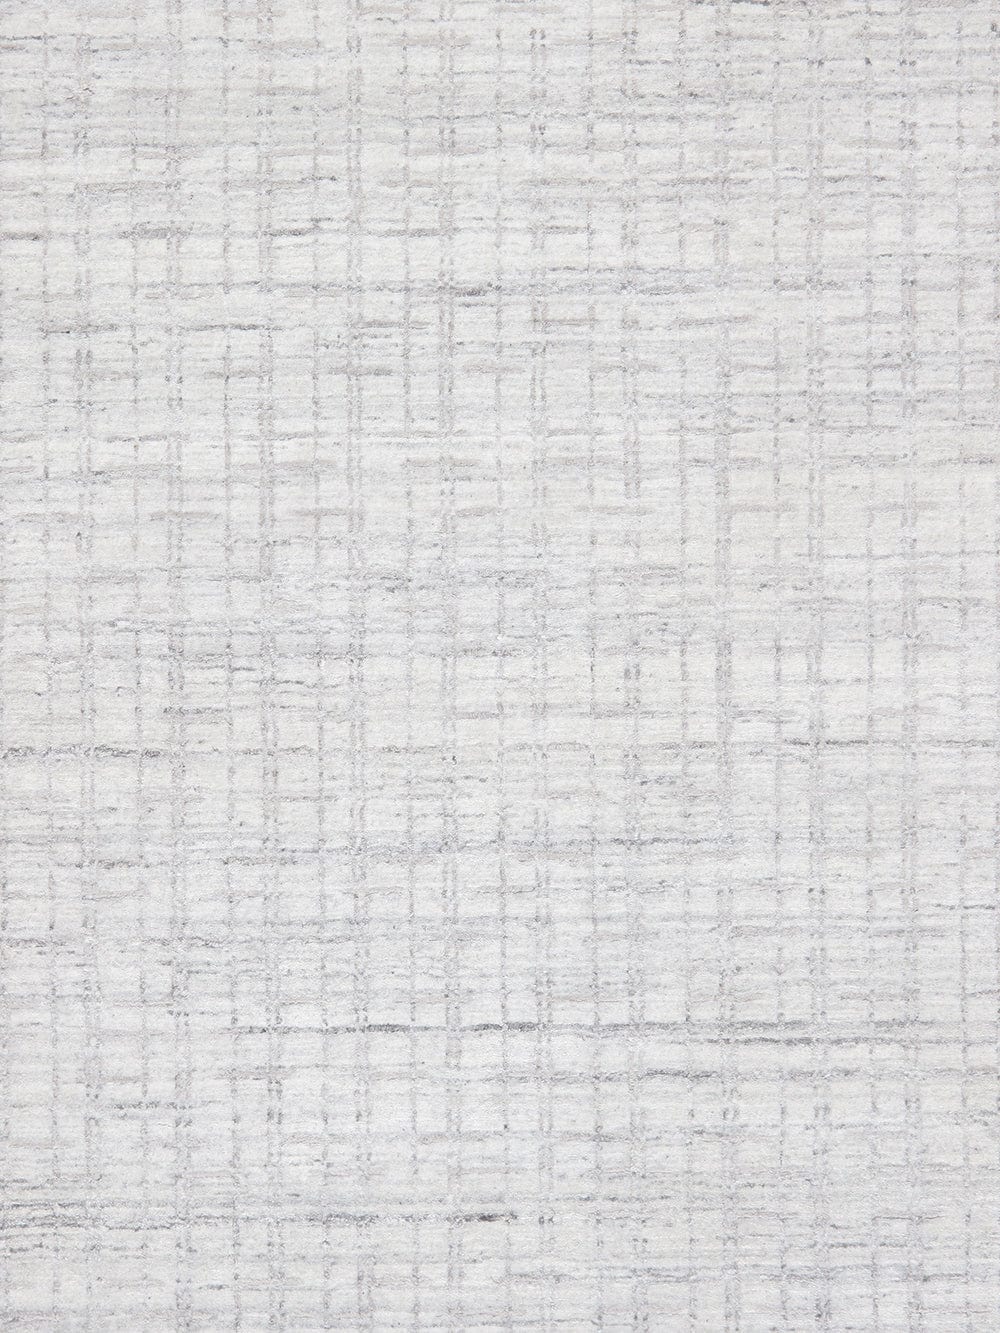 Slate Collection Hand-Loomed Ivory/Silver Bsilk & Wool Area Rug-10' 0" X 14' 0"